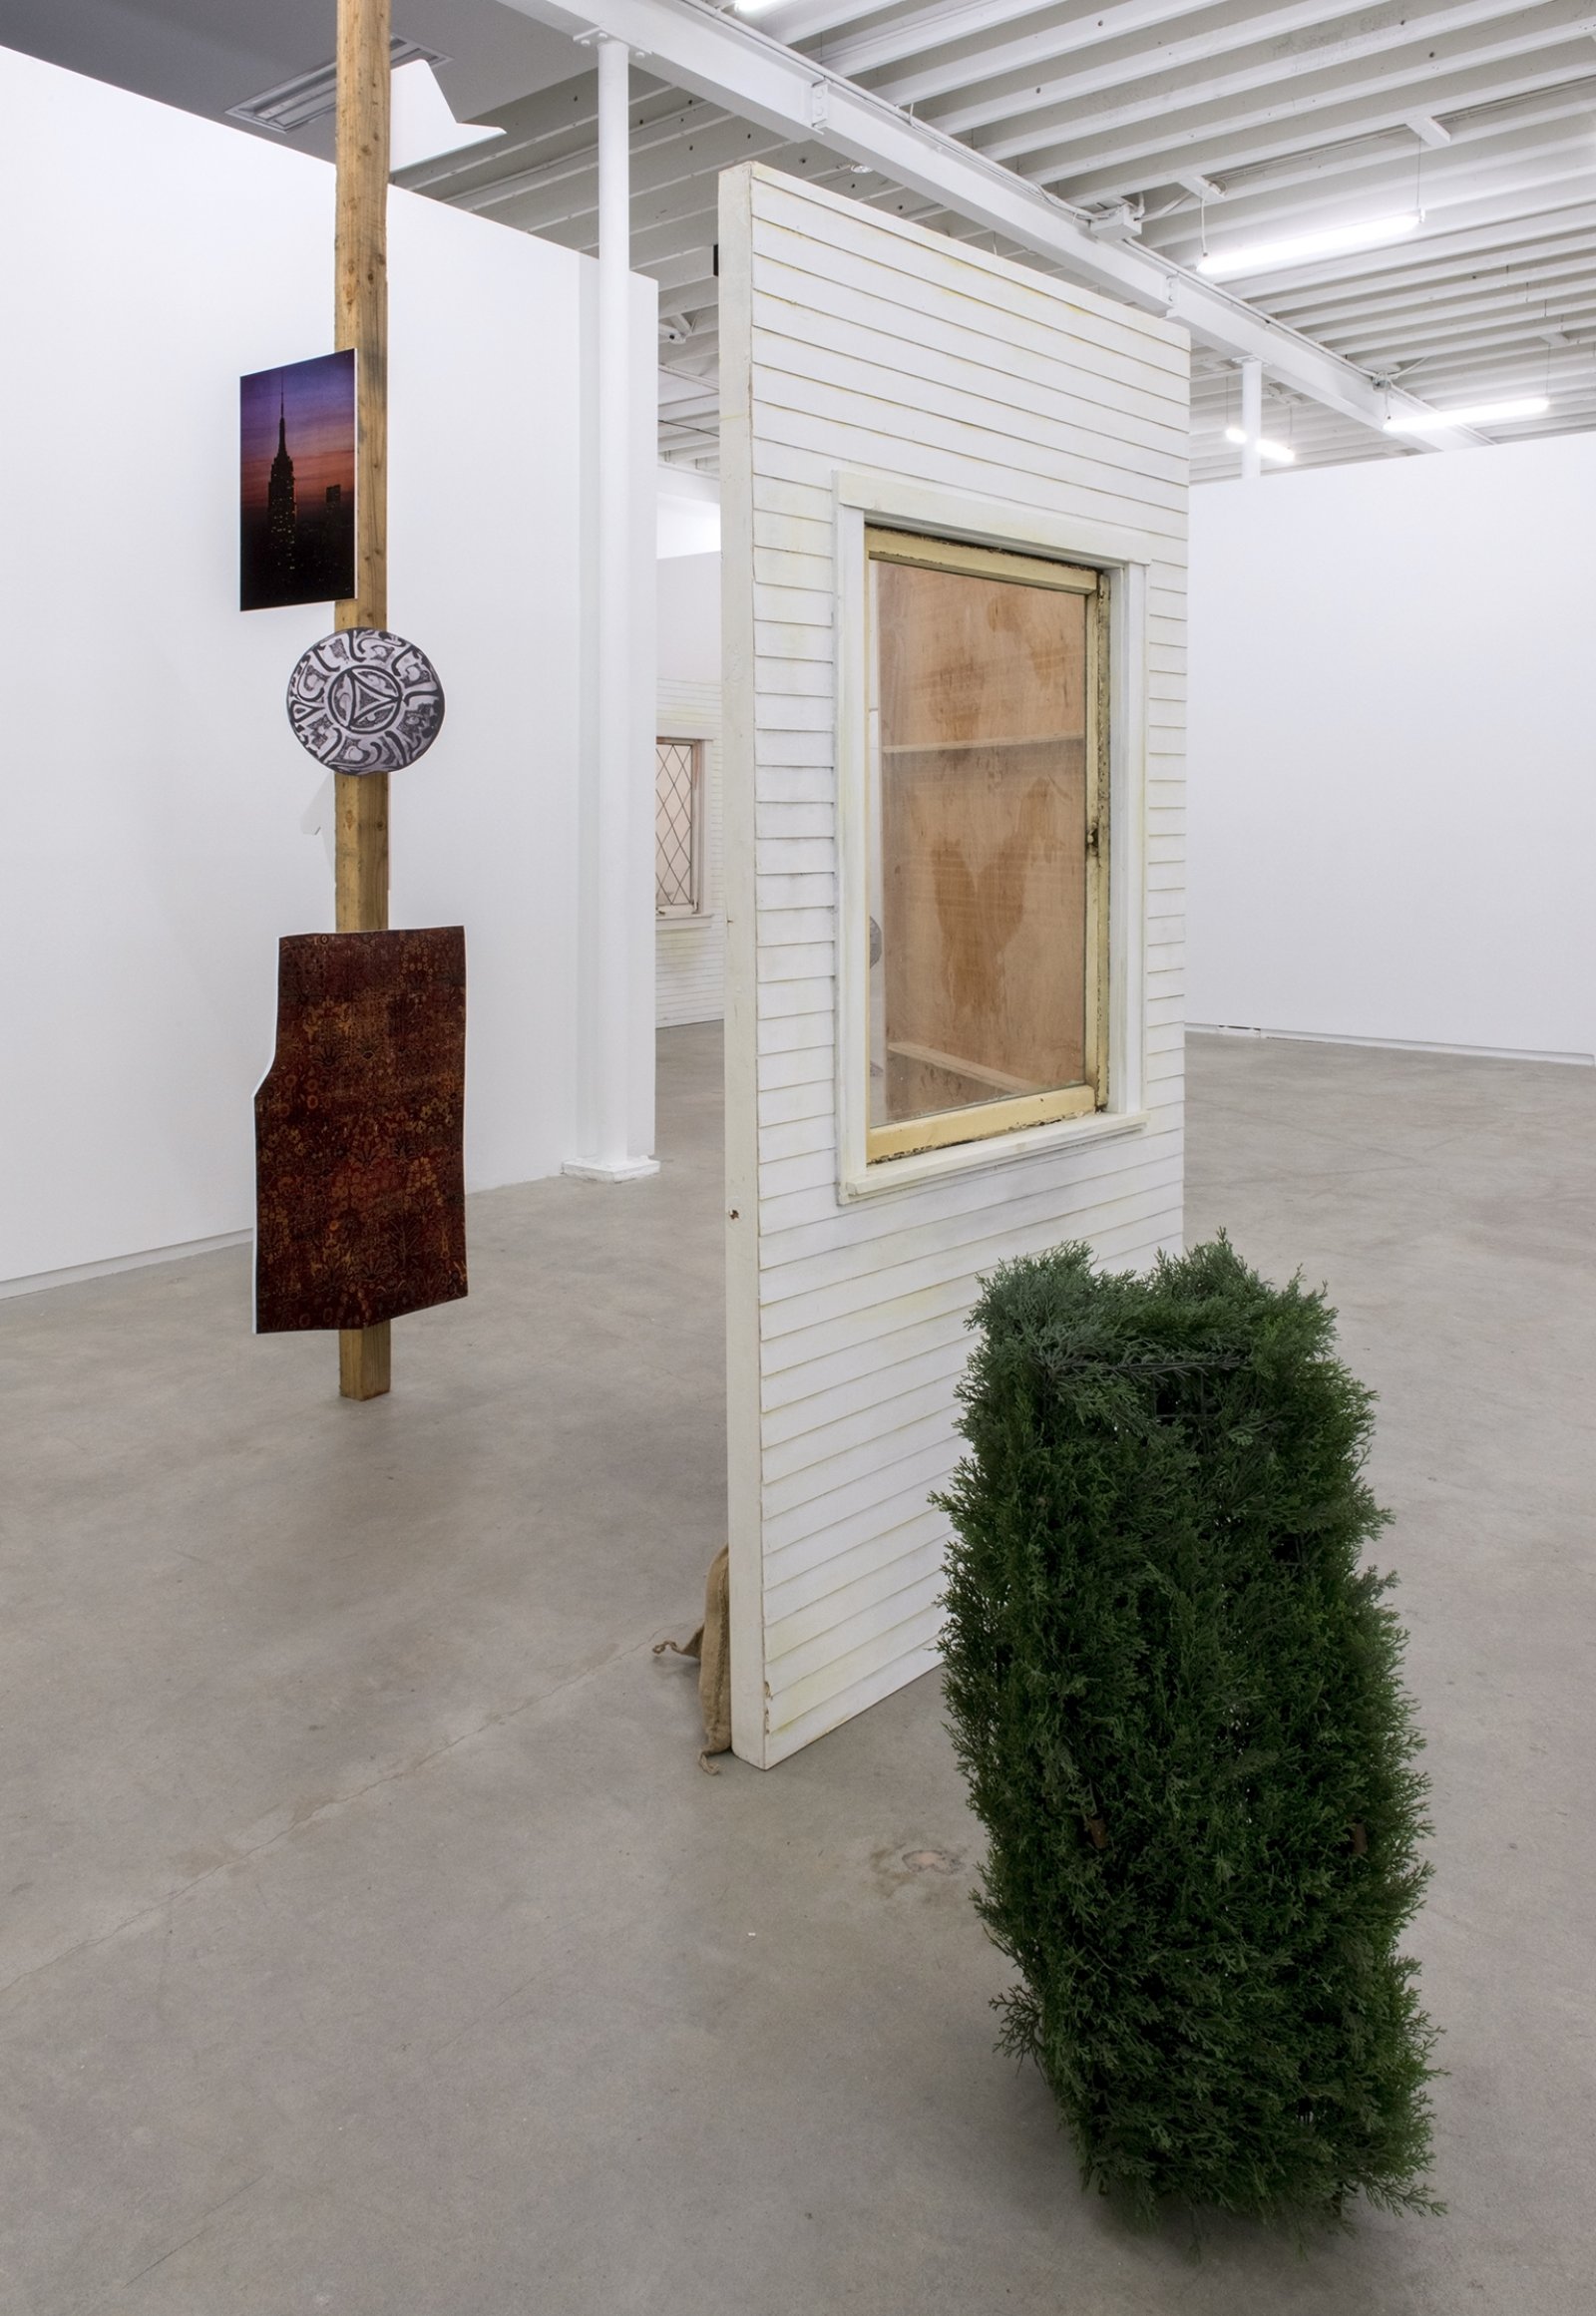 Geoffrey Farmer, This is where the plate goes..., 2014, douglas fir pole, 7 photographs mounted on foamcore, plastic topiary, 2 wooden wall façades, paint, window, sandbags, framed ink and cut-outs mounted on paper, dimensions variable by Geoffrey Farmer